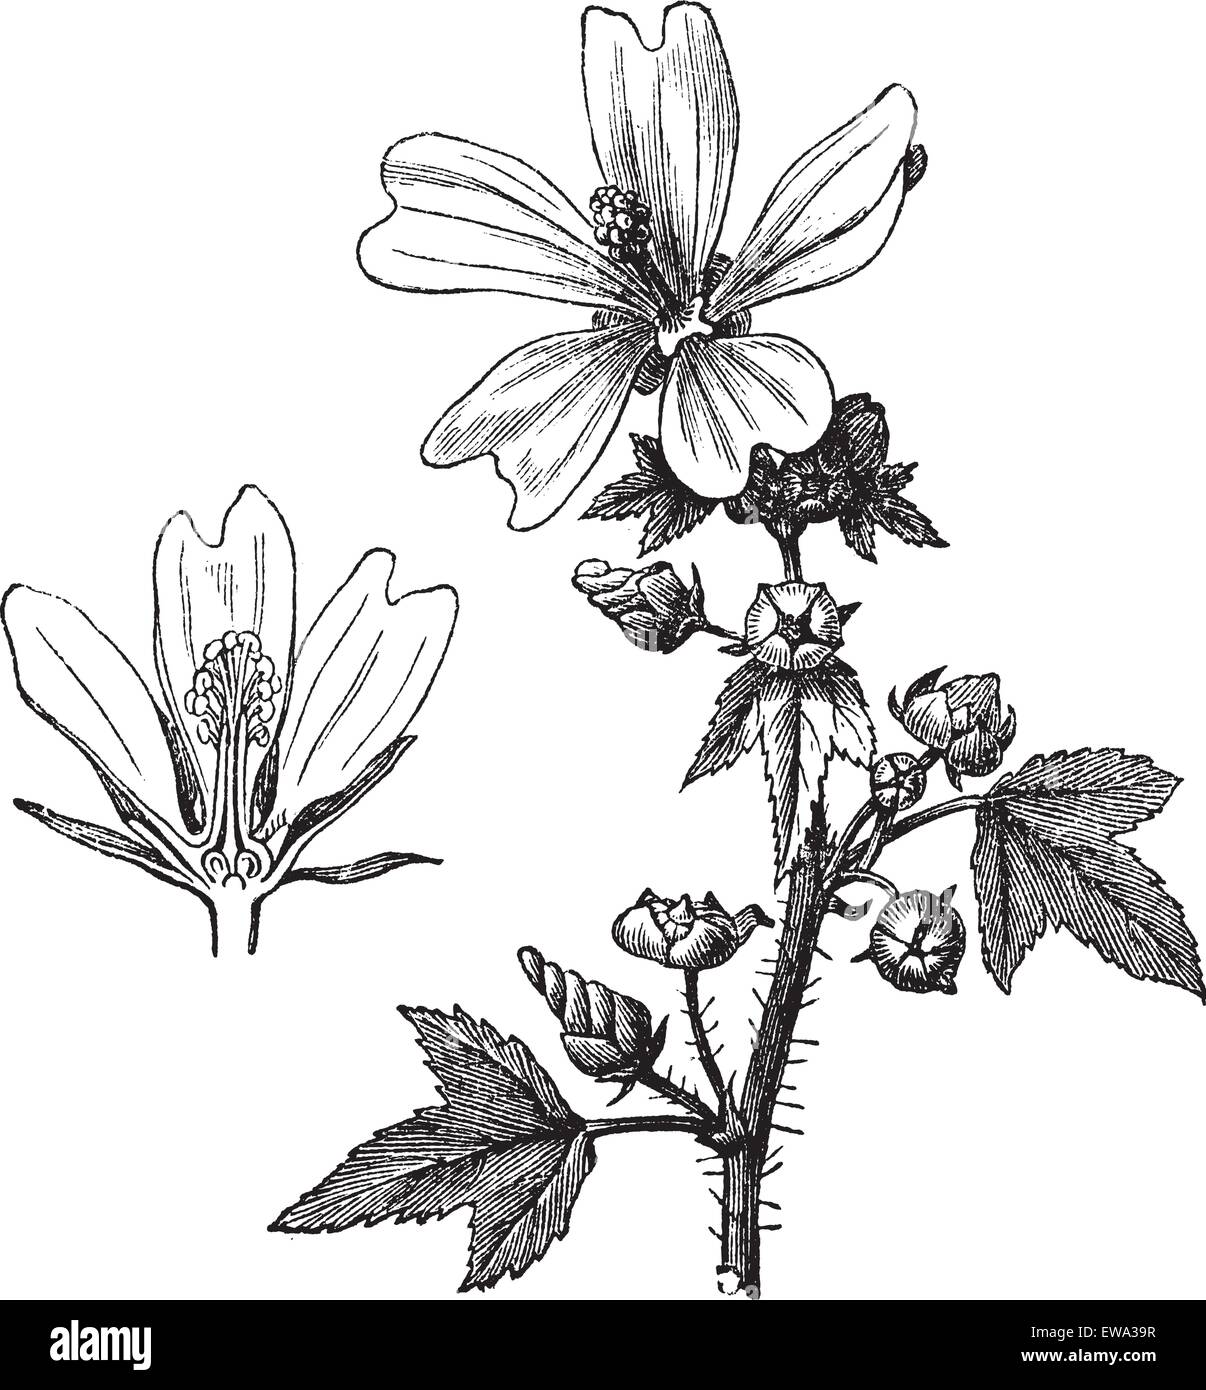 Common mallow or Malva sylvestris or Malva ambigua or Malva mauritiana or Malva erecta or Malva gymnocarpa or Cheeses or High mallow or Tall mallow, vintage engraving. Old engraved illustration of Common mallow isolated on a white background. Stock Vector